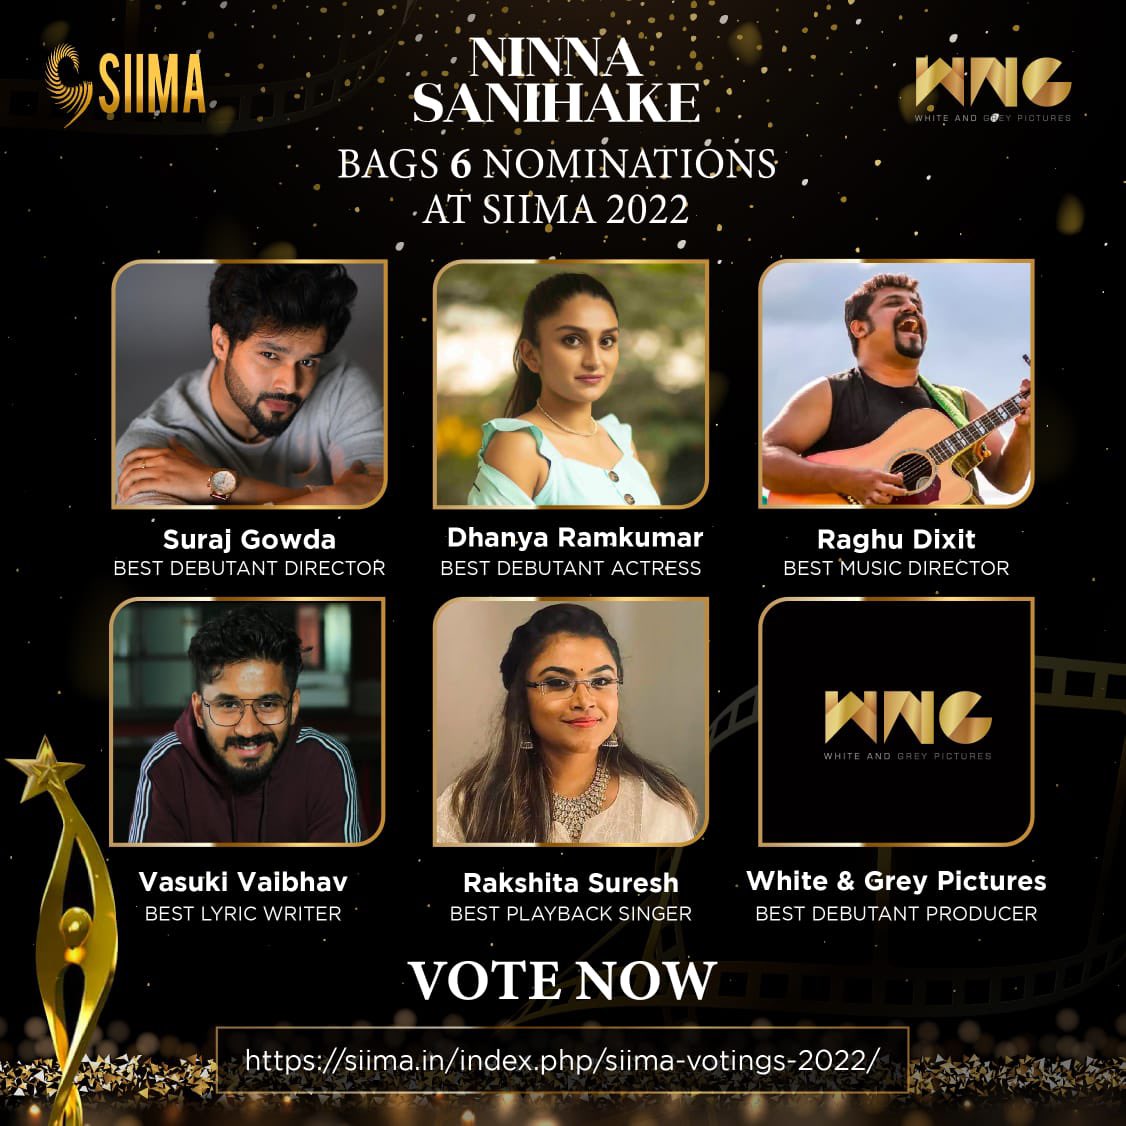 We are thrilled to annouce that Ninna Sanihake has got 6 nominations in SIIMA Awards 2022. Please vote now and show us your support. Click on the link below to cast your votes. siima.in/index.php/siim… #SIIMA2022 #SiimaNominations @Raghu_Dixit @DhanyaRamkumar @NinnaSanihake